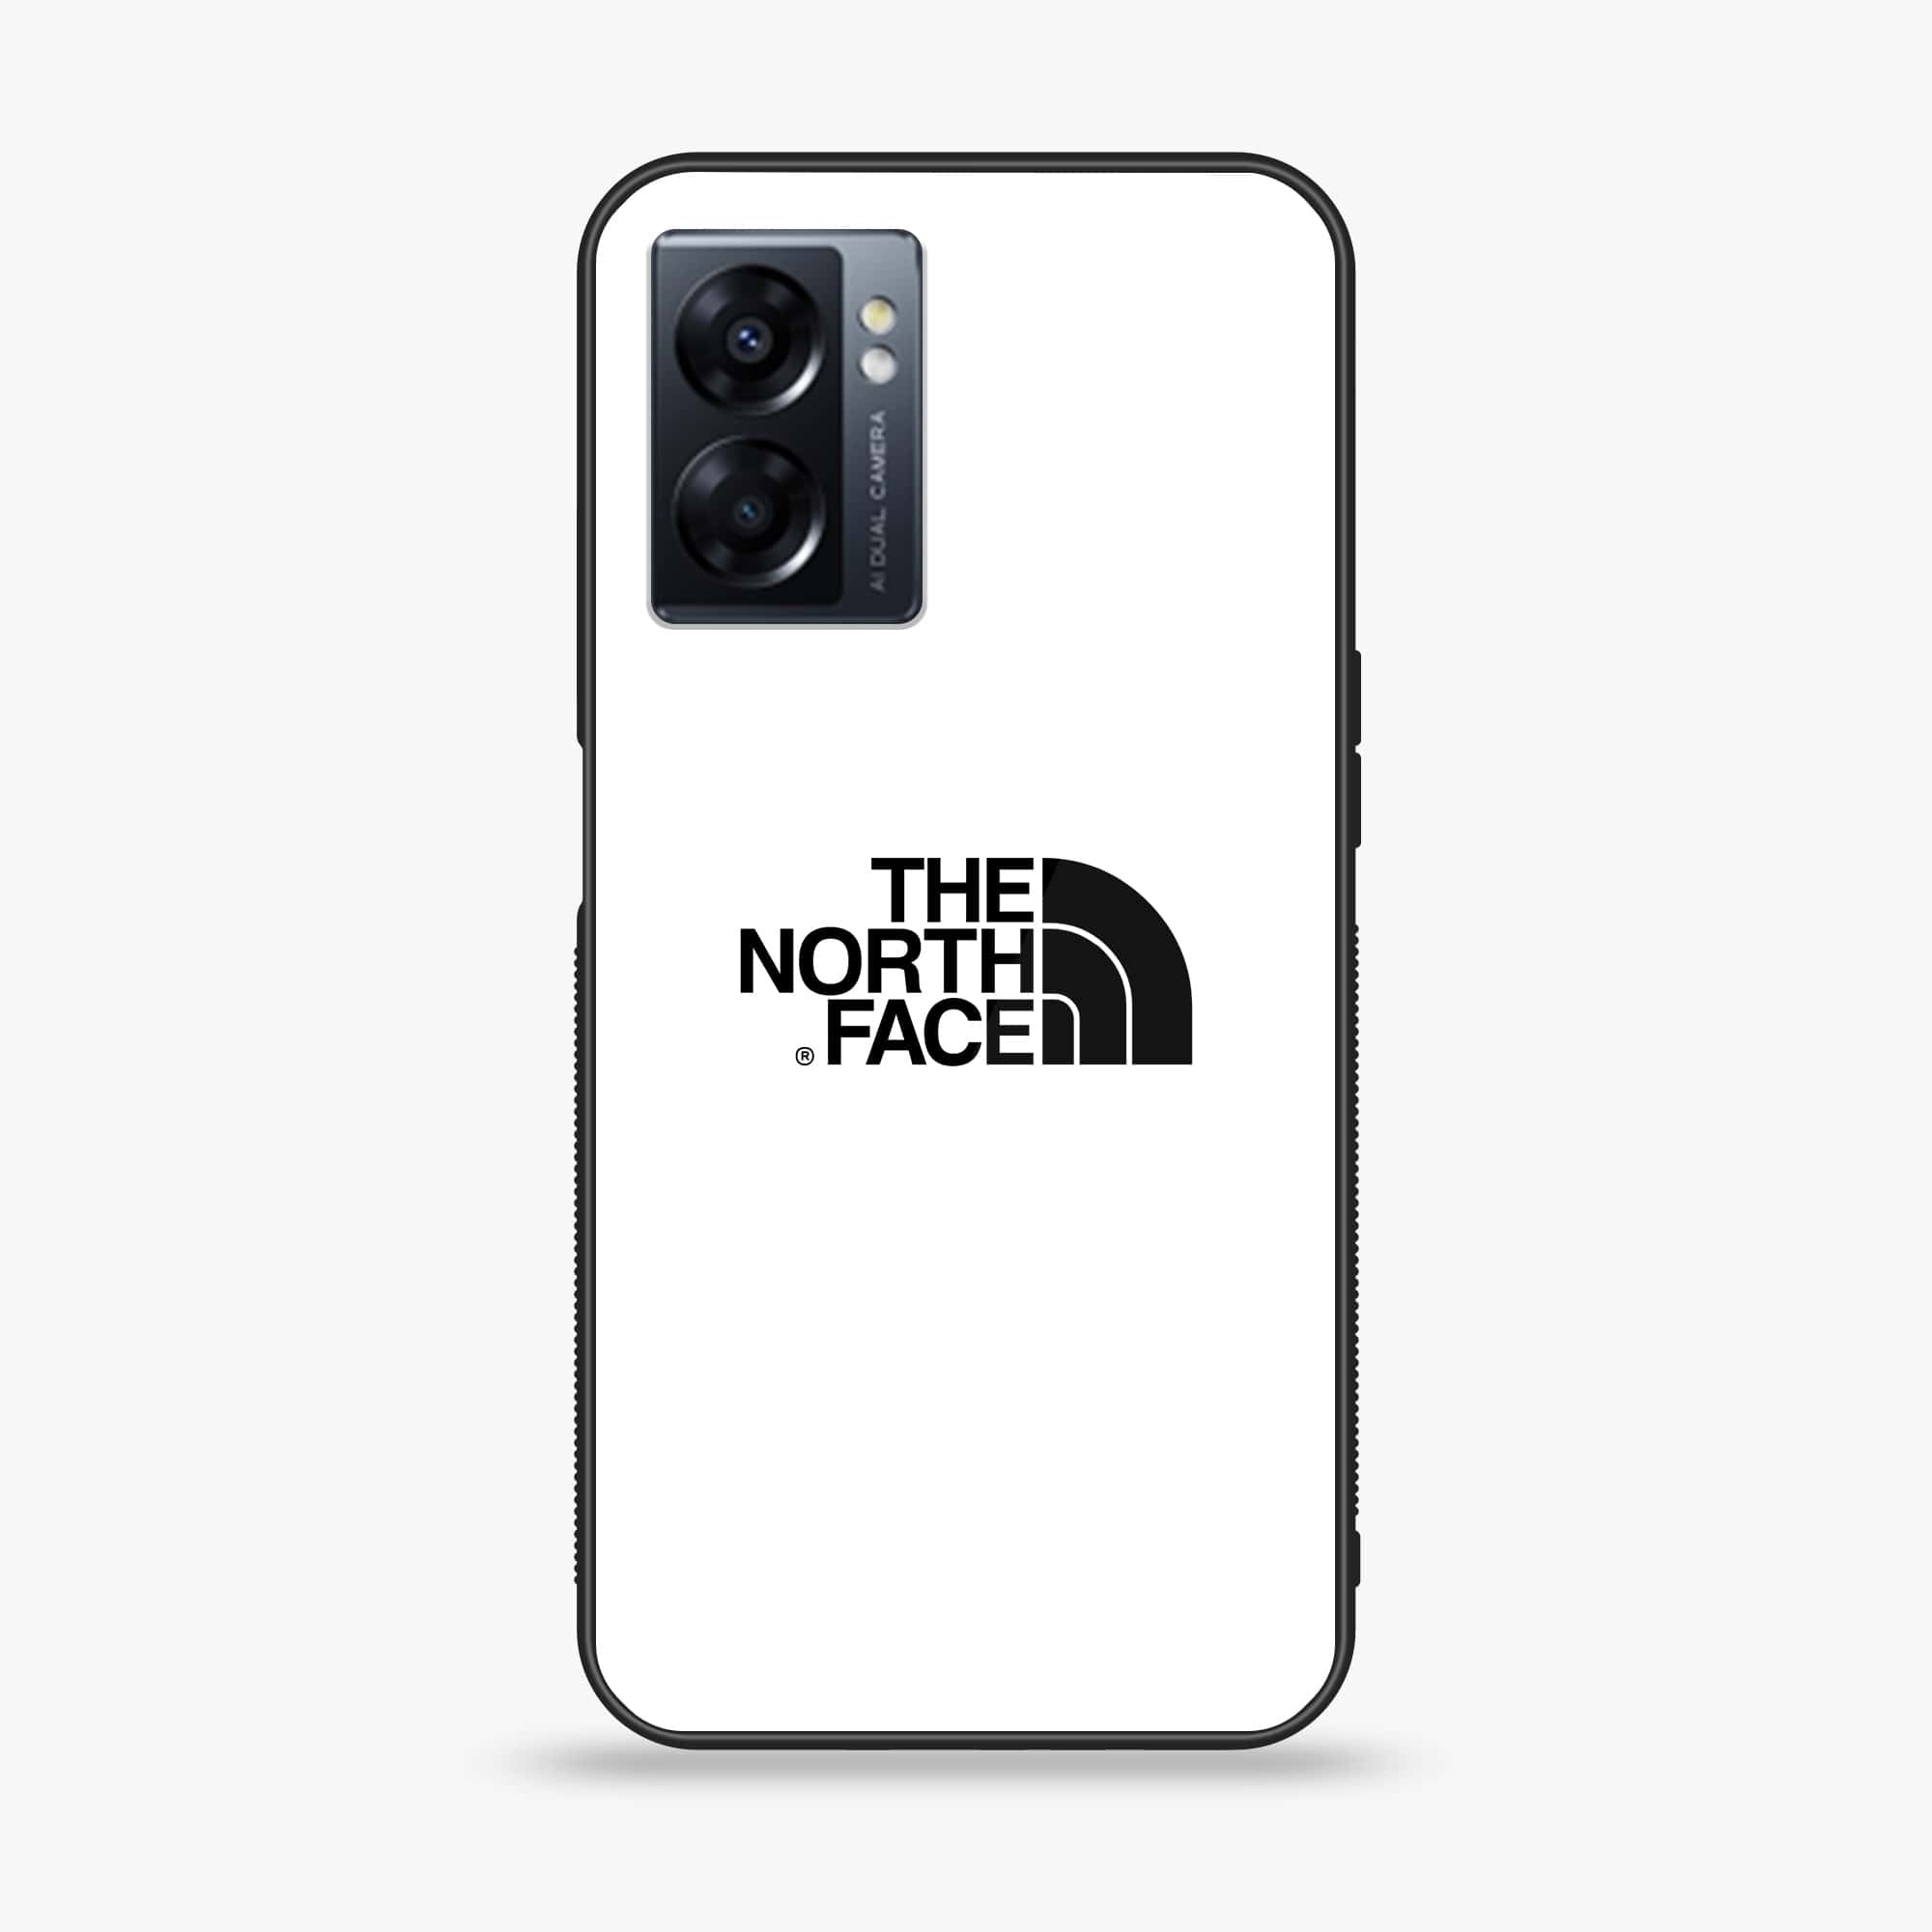 Oppo A77s - The North Face Series - Premium Printed Glass soft Bumper shock Proof Case